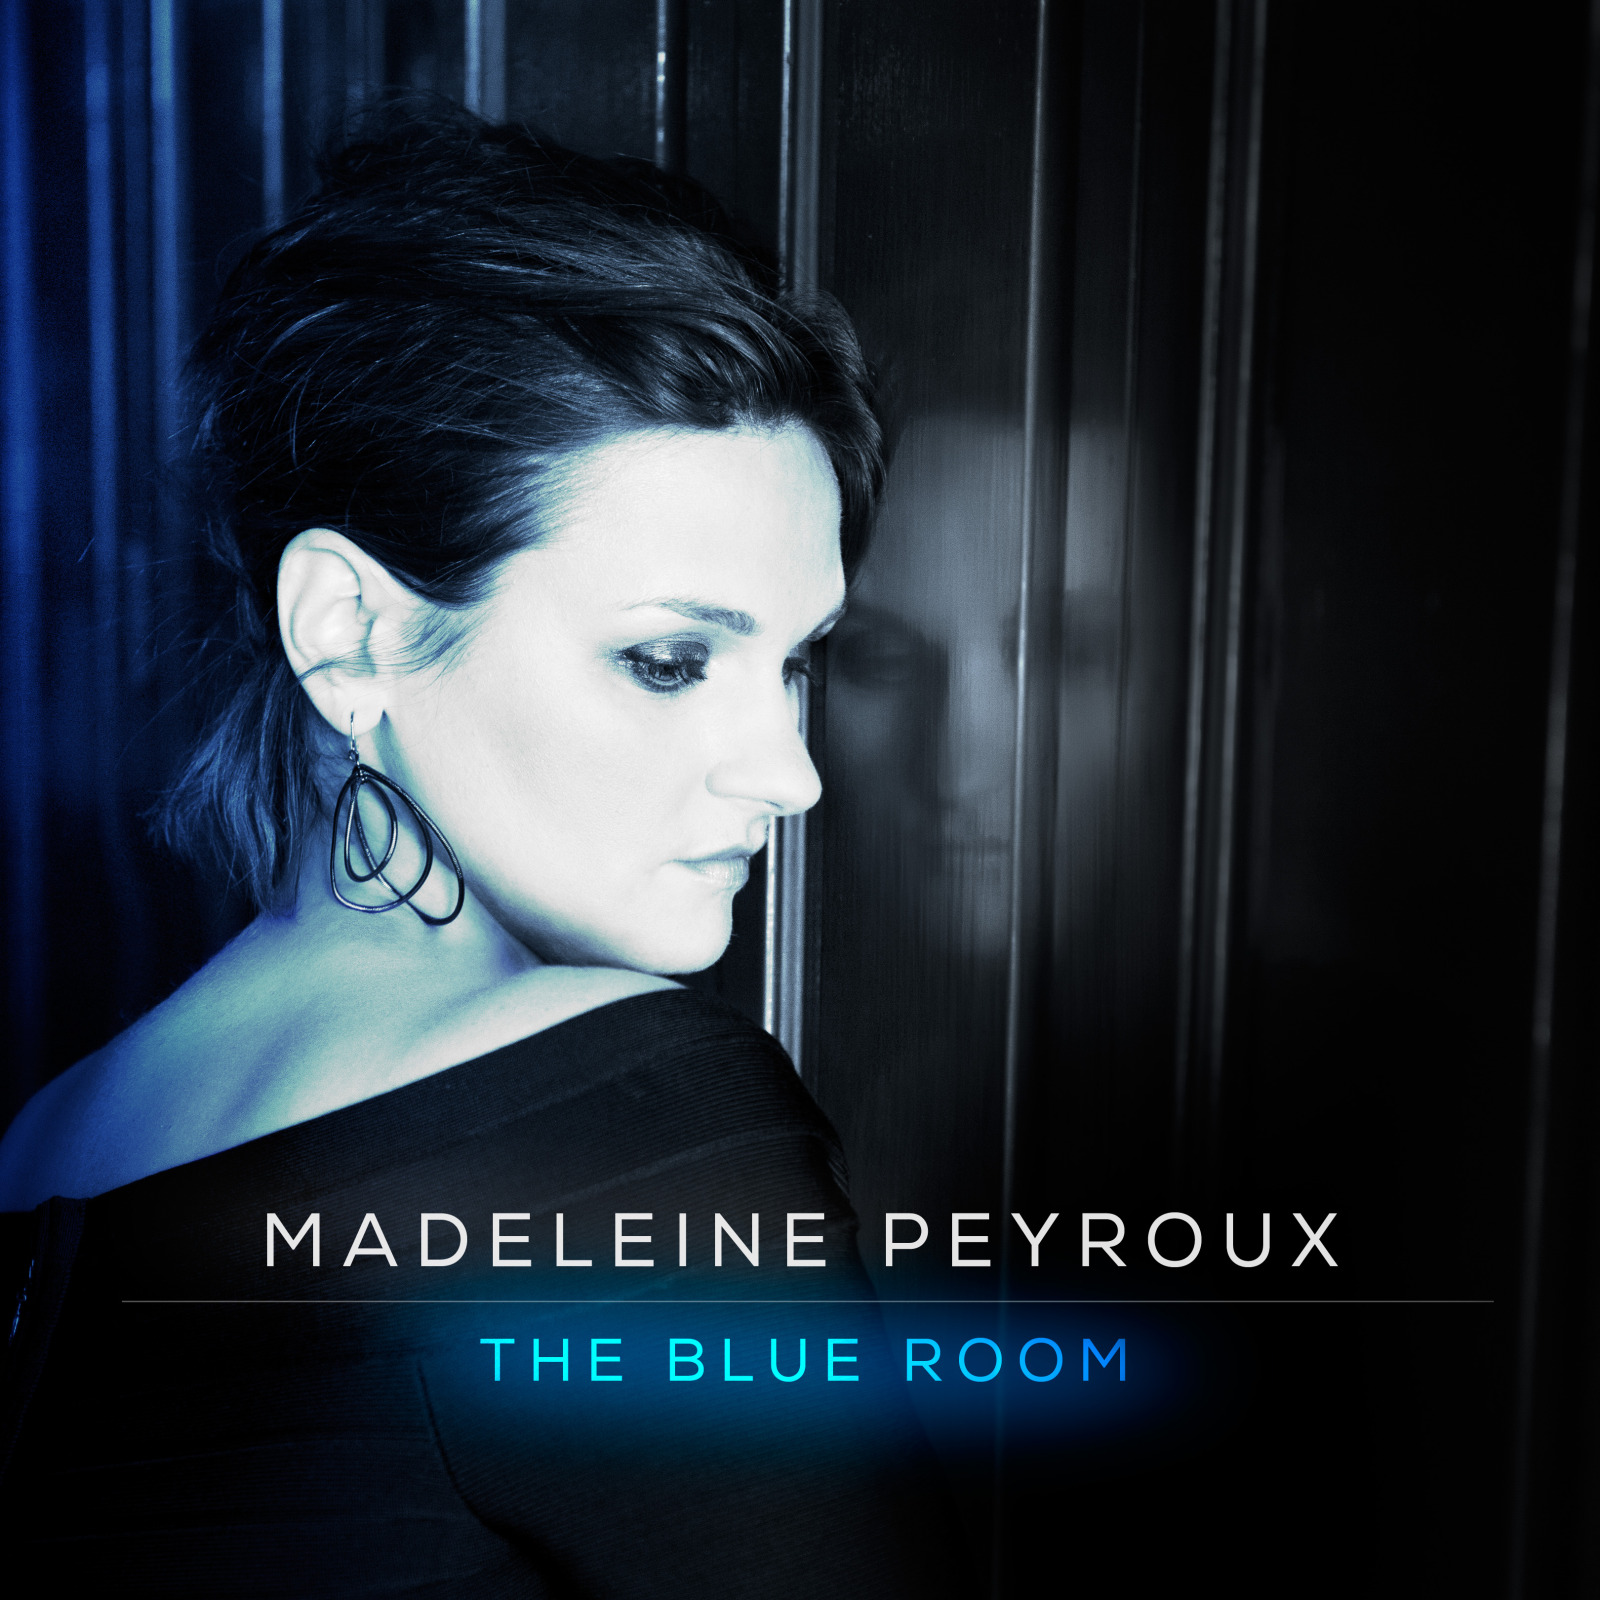 News Added Mar 03, 2013 Celebrated and Award-winning jazz singer, songwriter, and guitarist, Madeleine Peyroux gears up to release her inspired new album, THE BLUE ROOM, March 5, 2013 on Decca. The album is a return to what she is known best for reinterpreting songs with an emotion and depth that cant help but touch […]